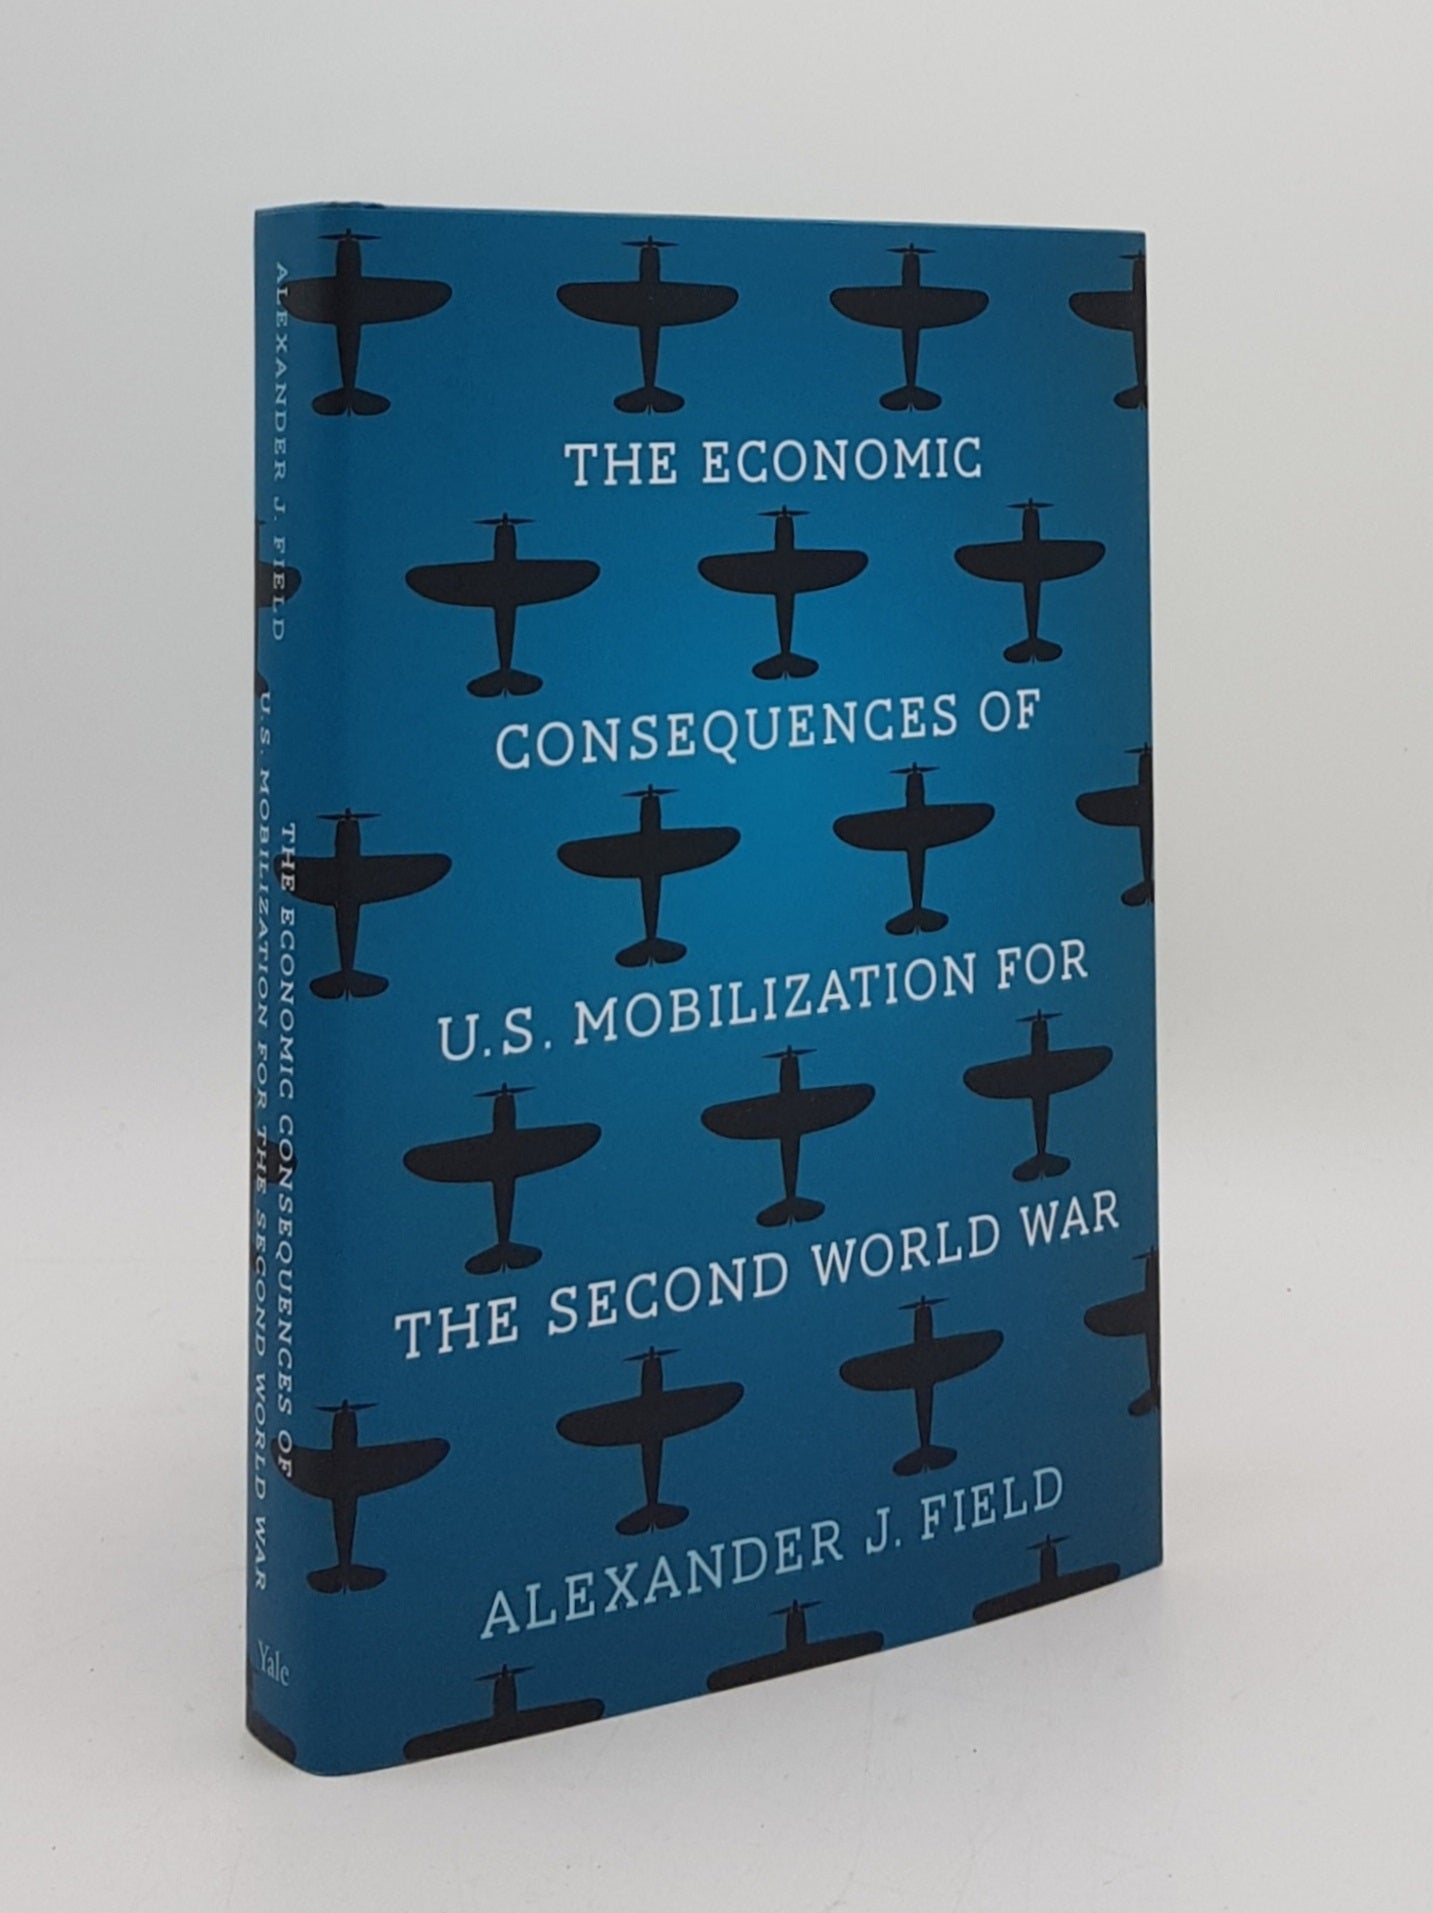 FIELD Alexander J. - The Economic Consequences of U.S. Mobilization for the Second World War